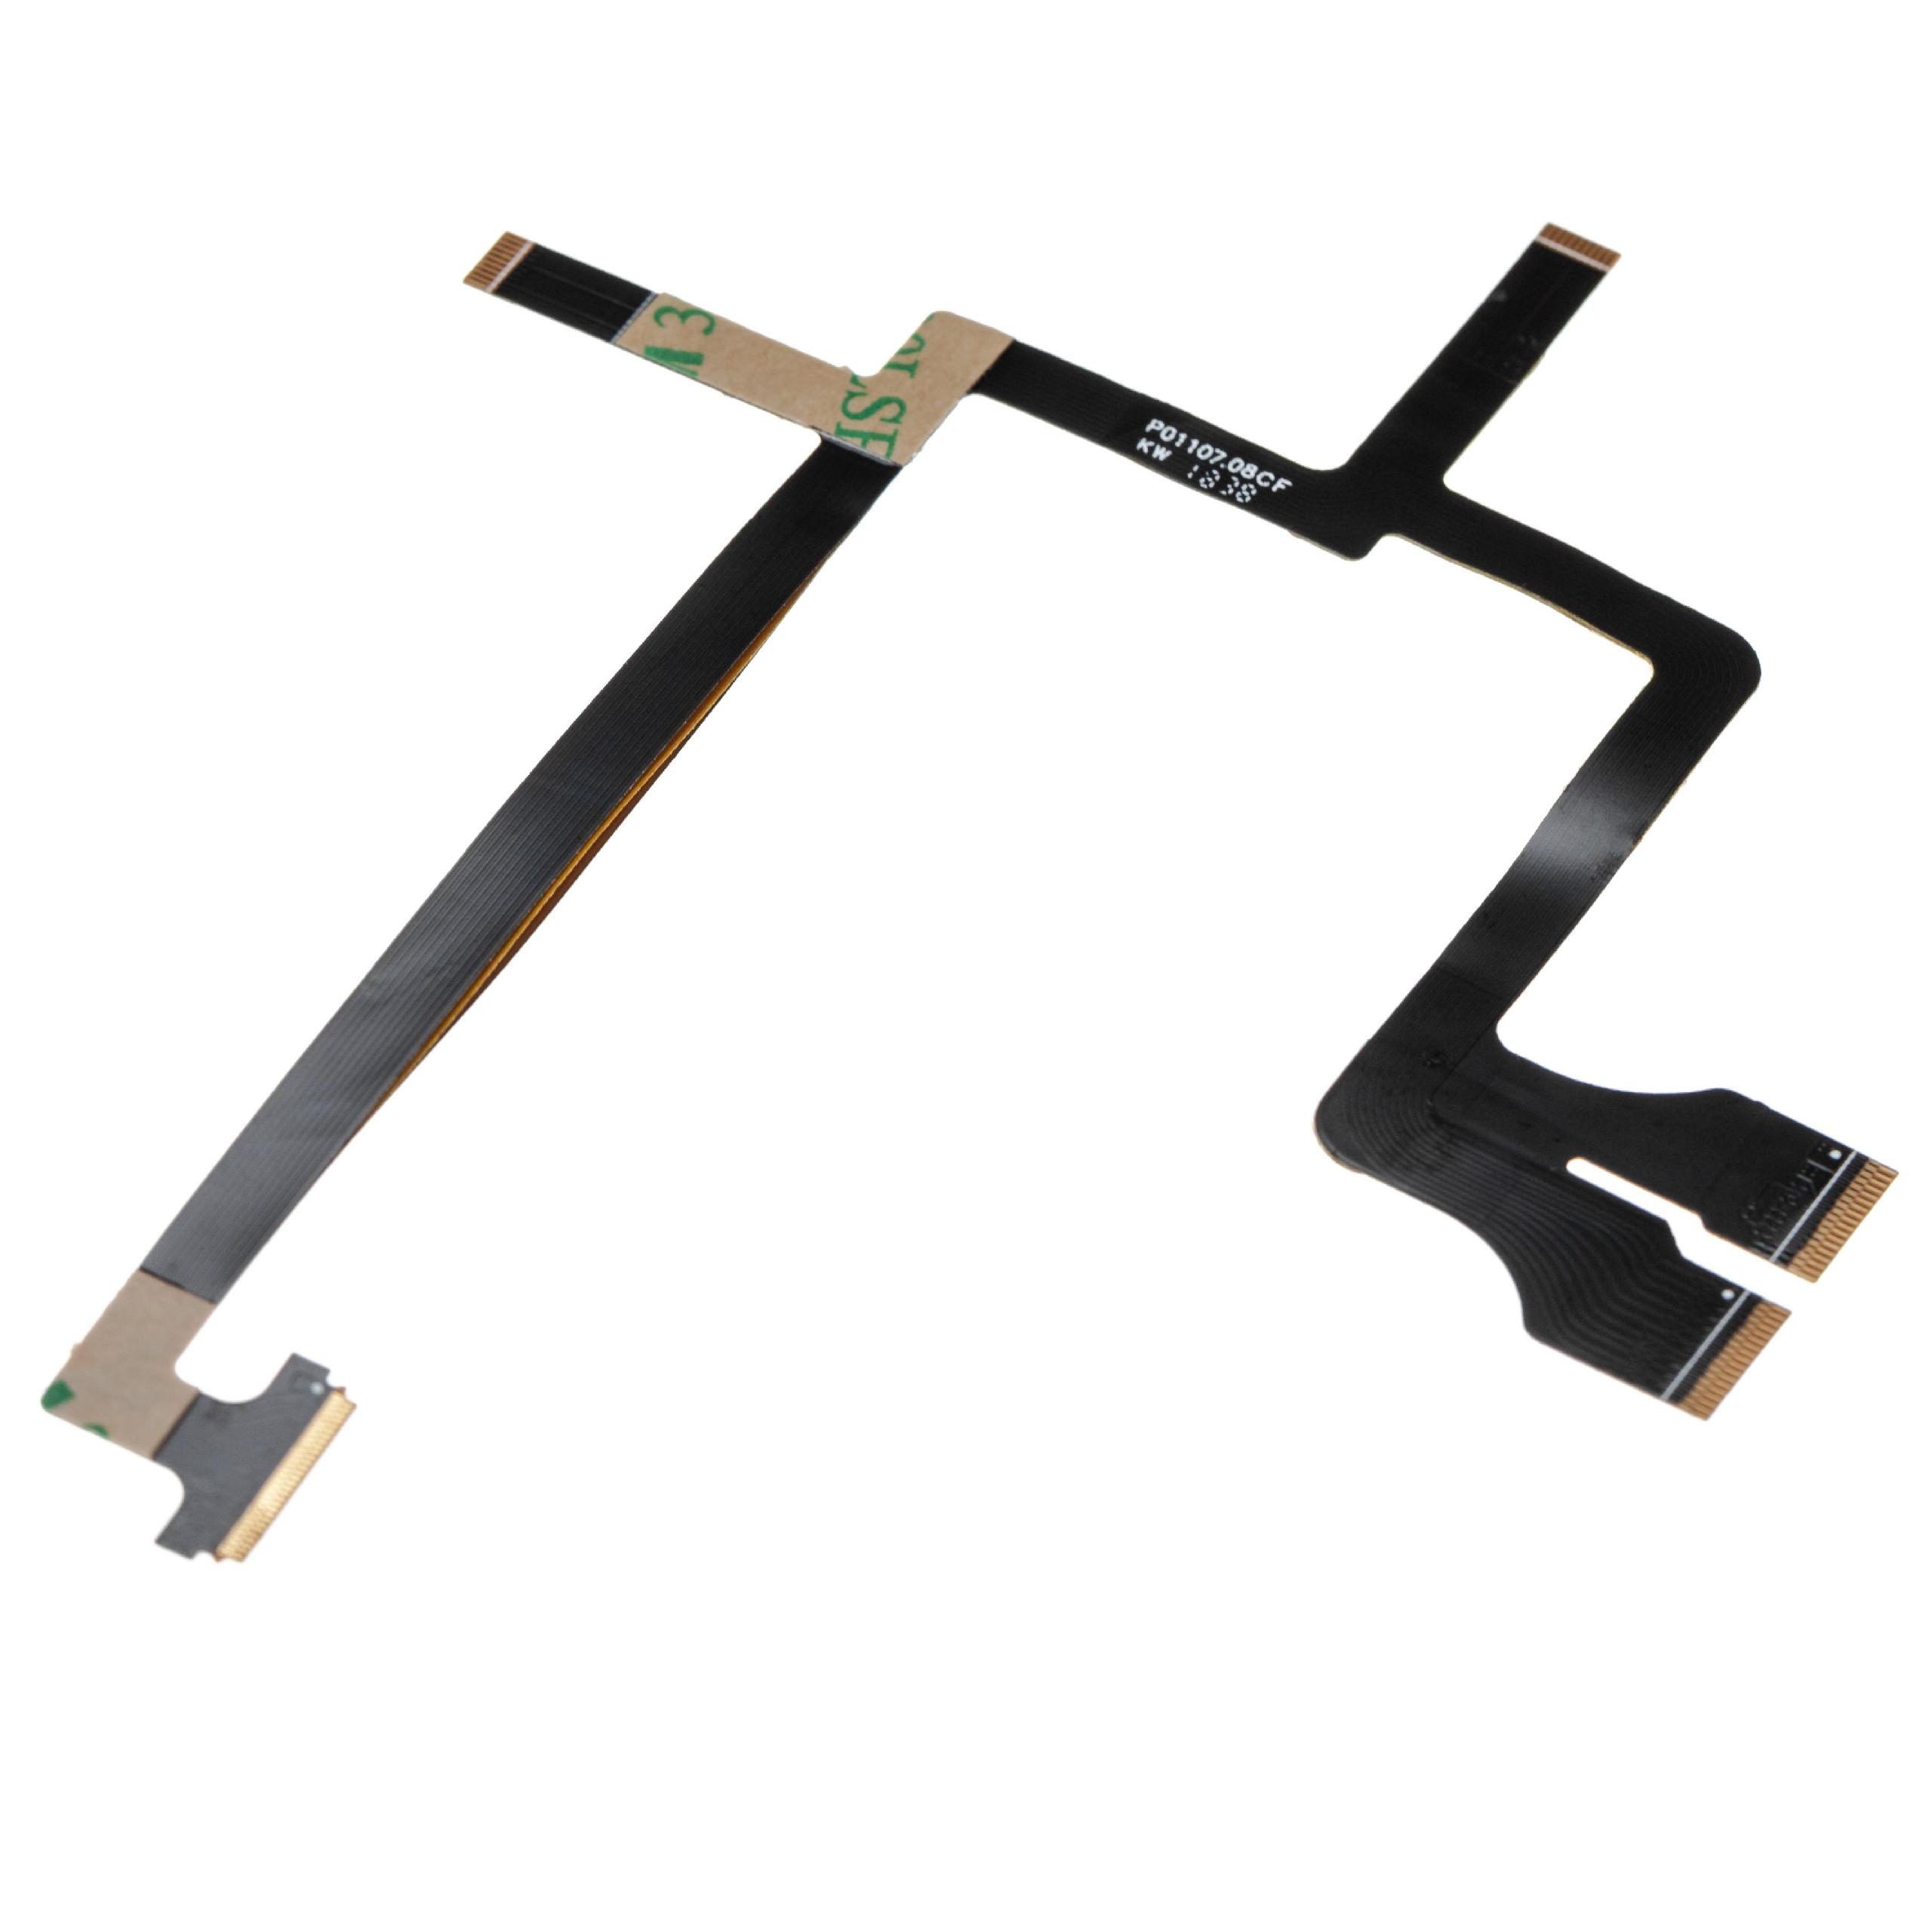 Ribbon Flex Cable suitable for DJI Phantom 3 Advanced, 3 Pro Drone, Gimbal Part No 49 - with double-sided tape